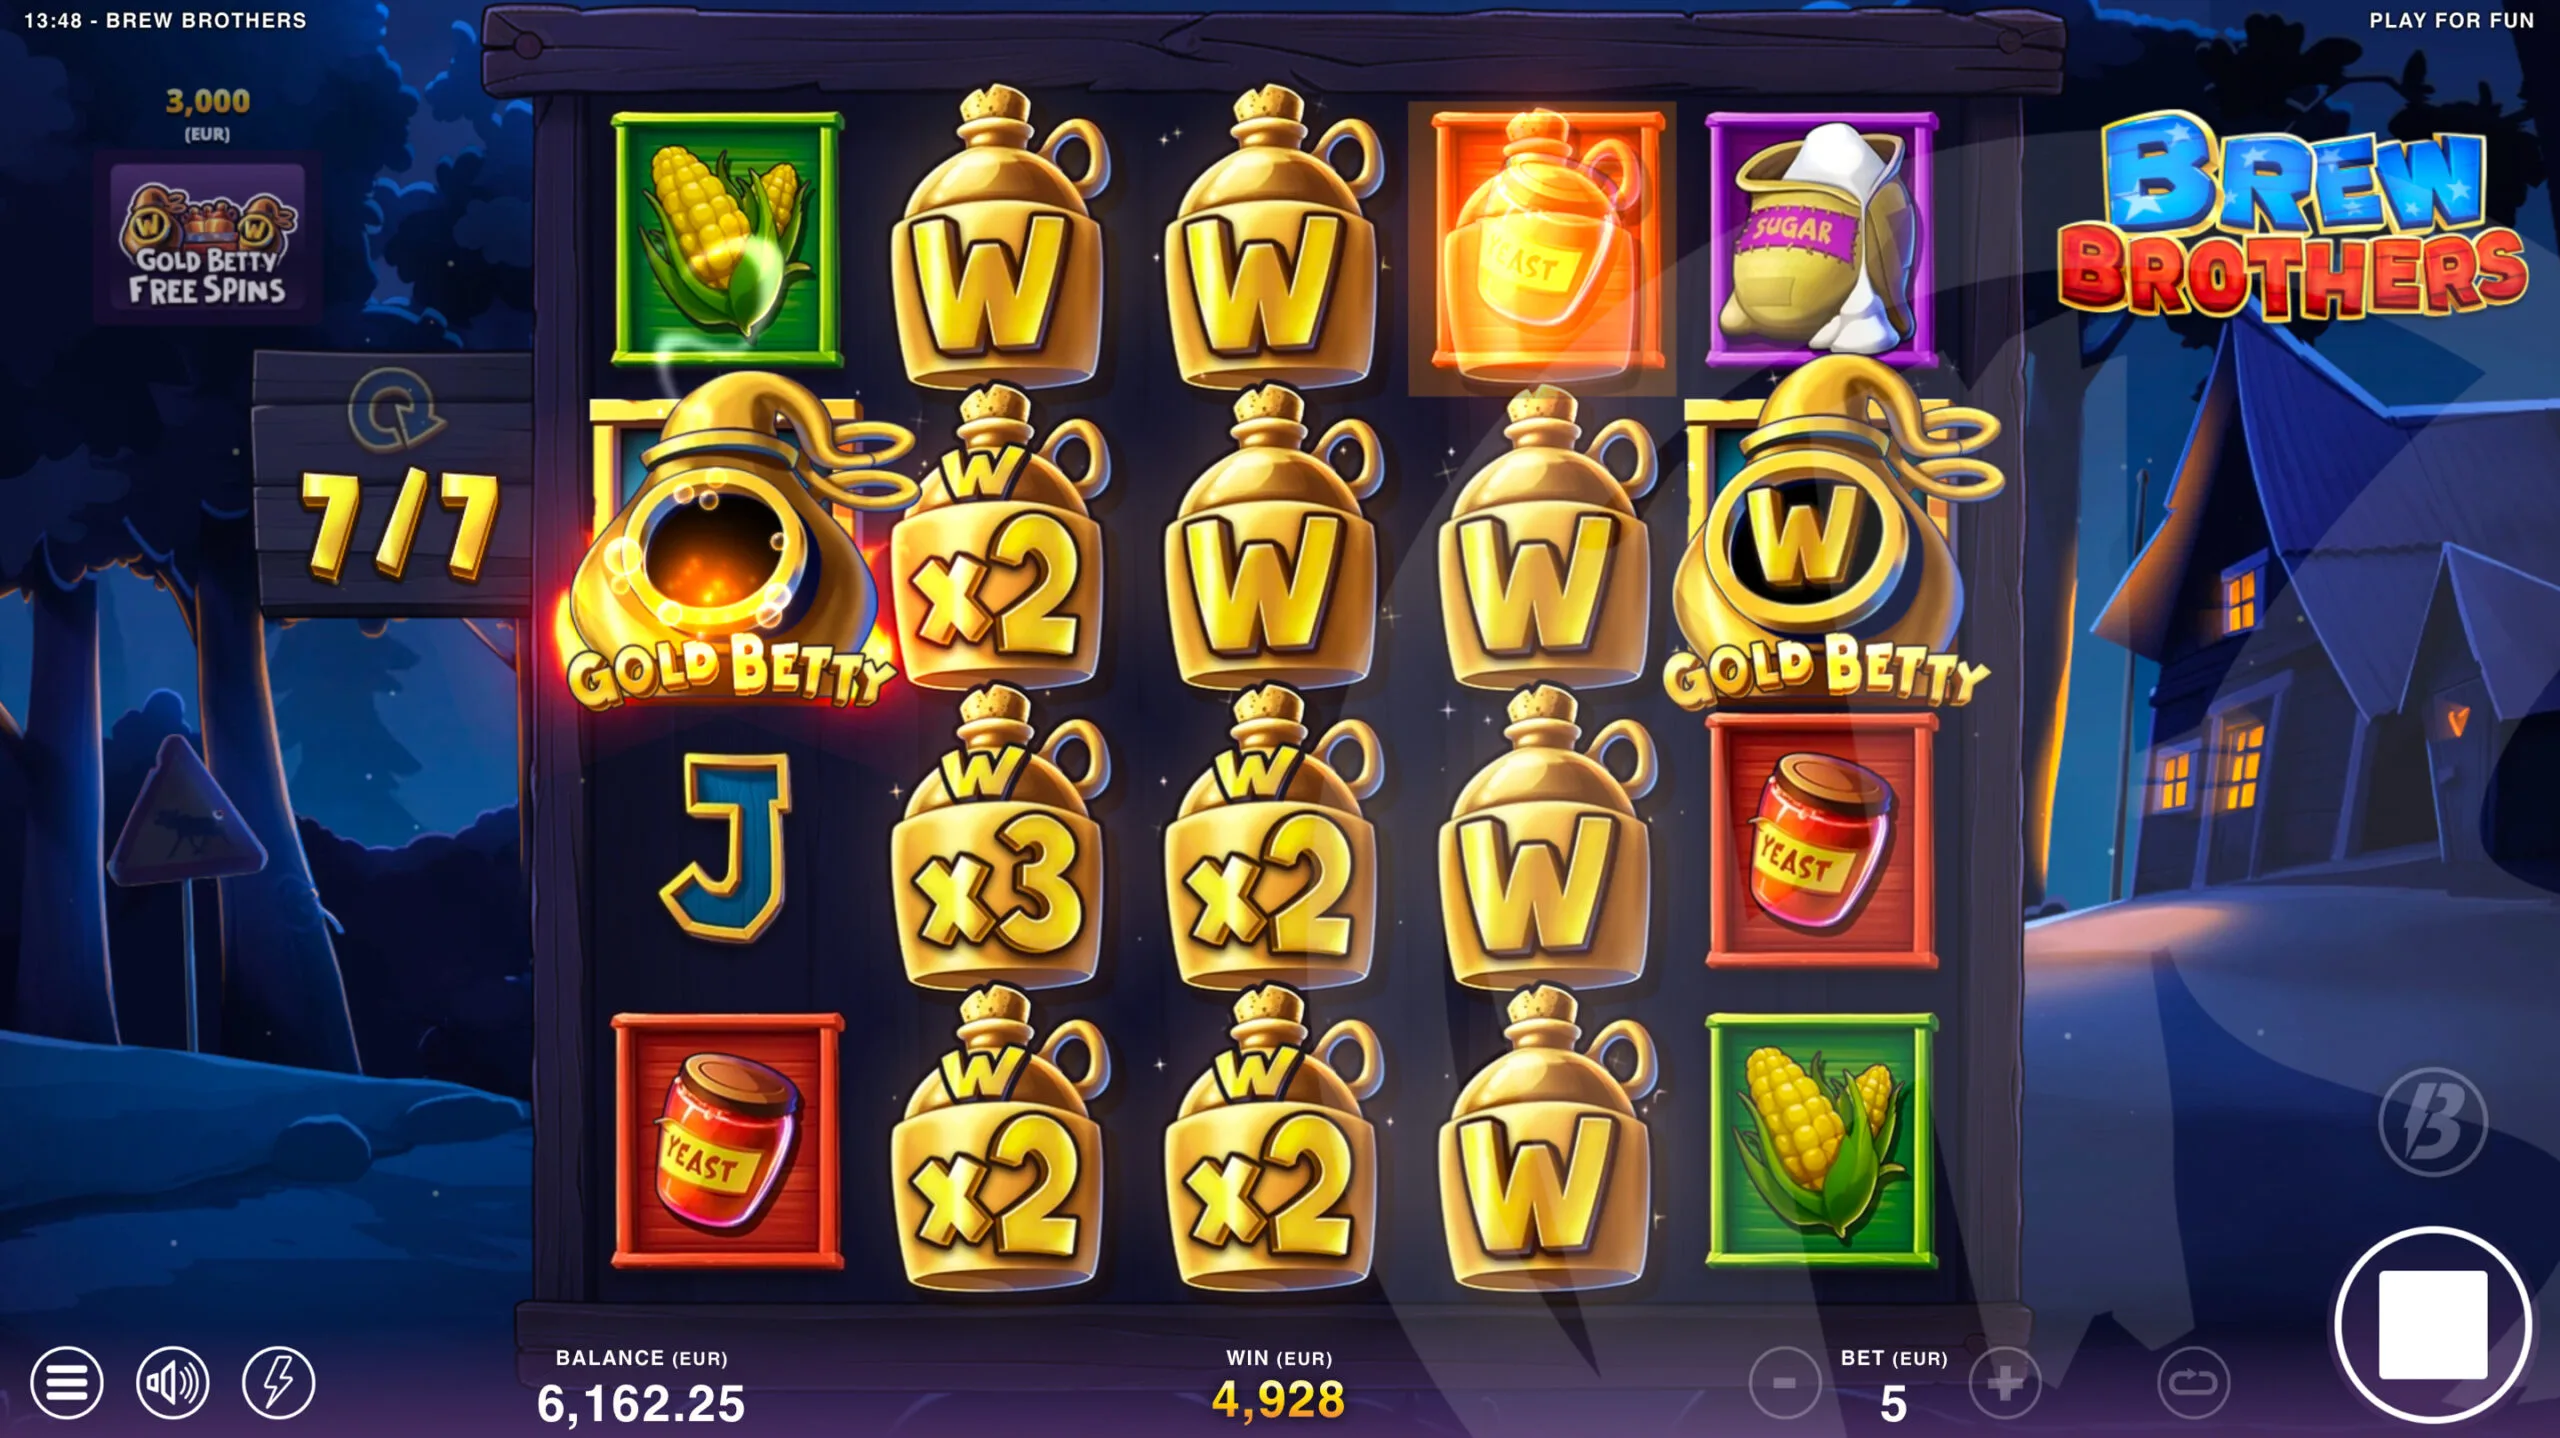 Gold Betty Symbols May Activate on Every Spin in the Free Spins Bonus